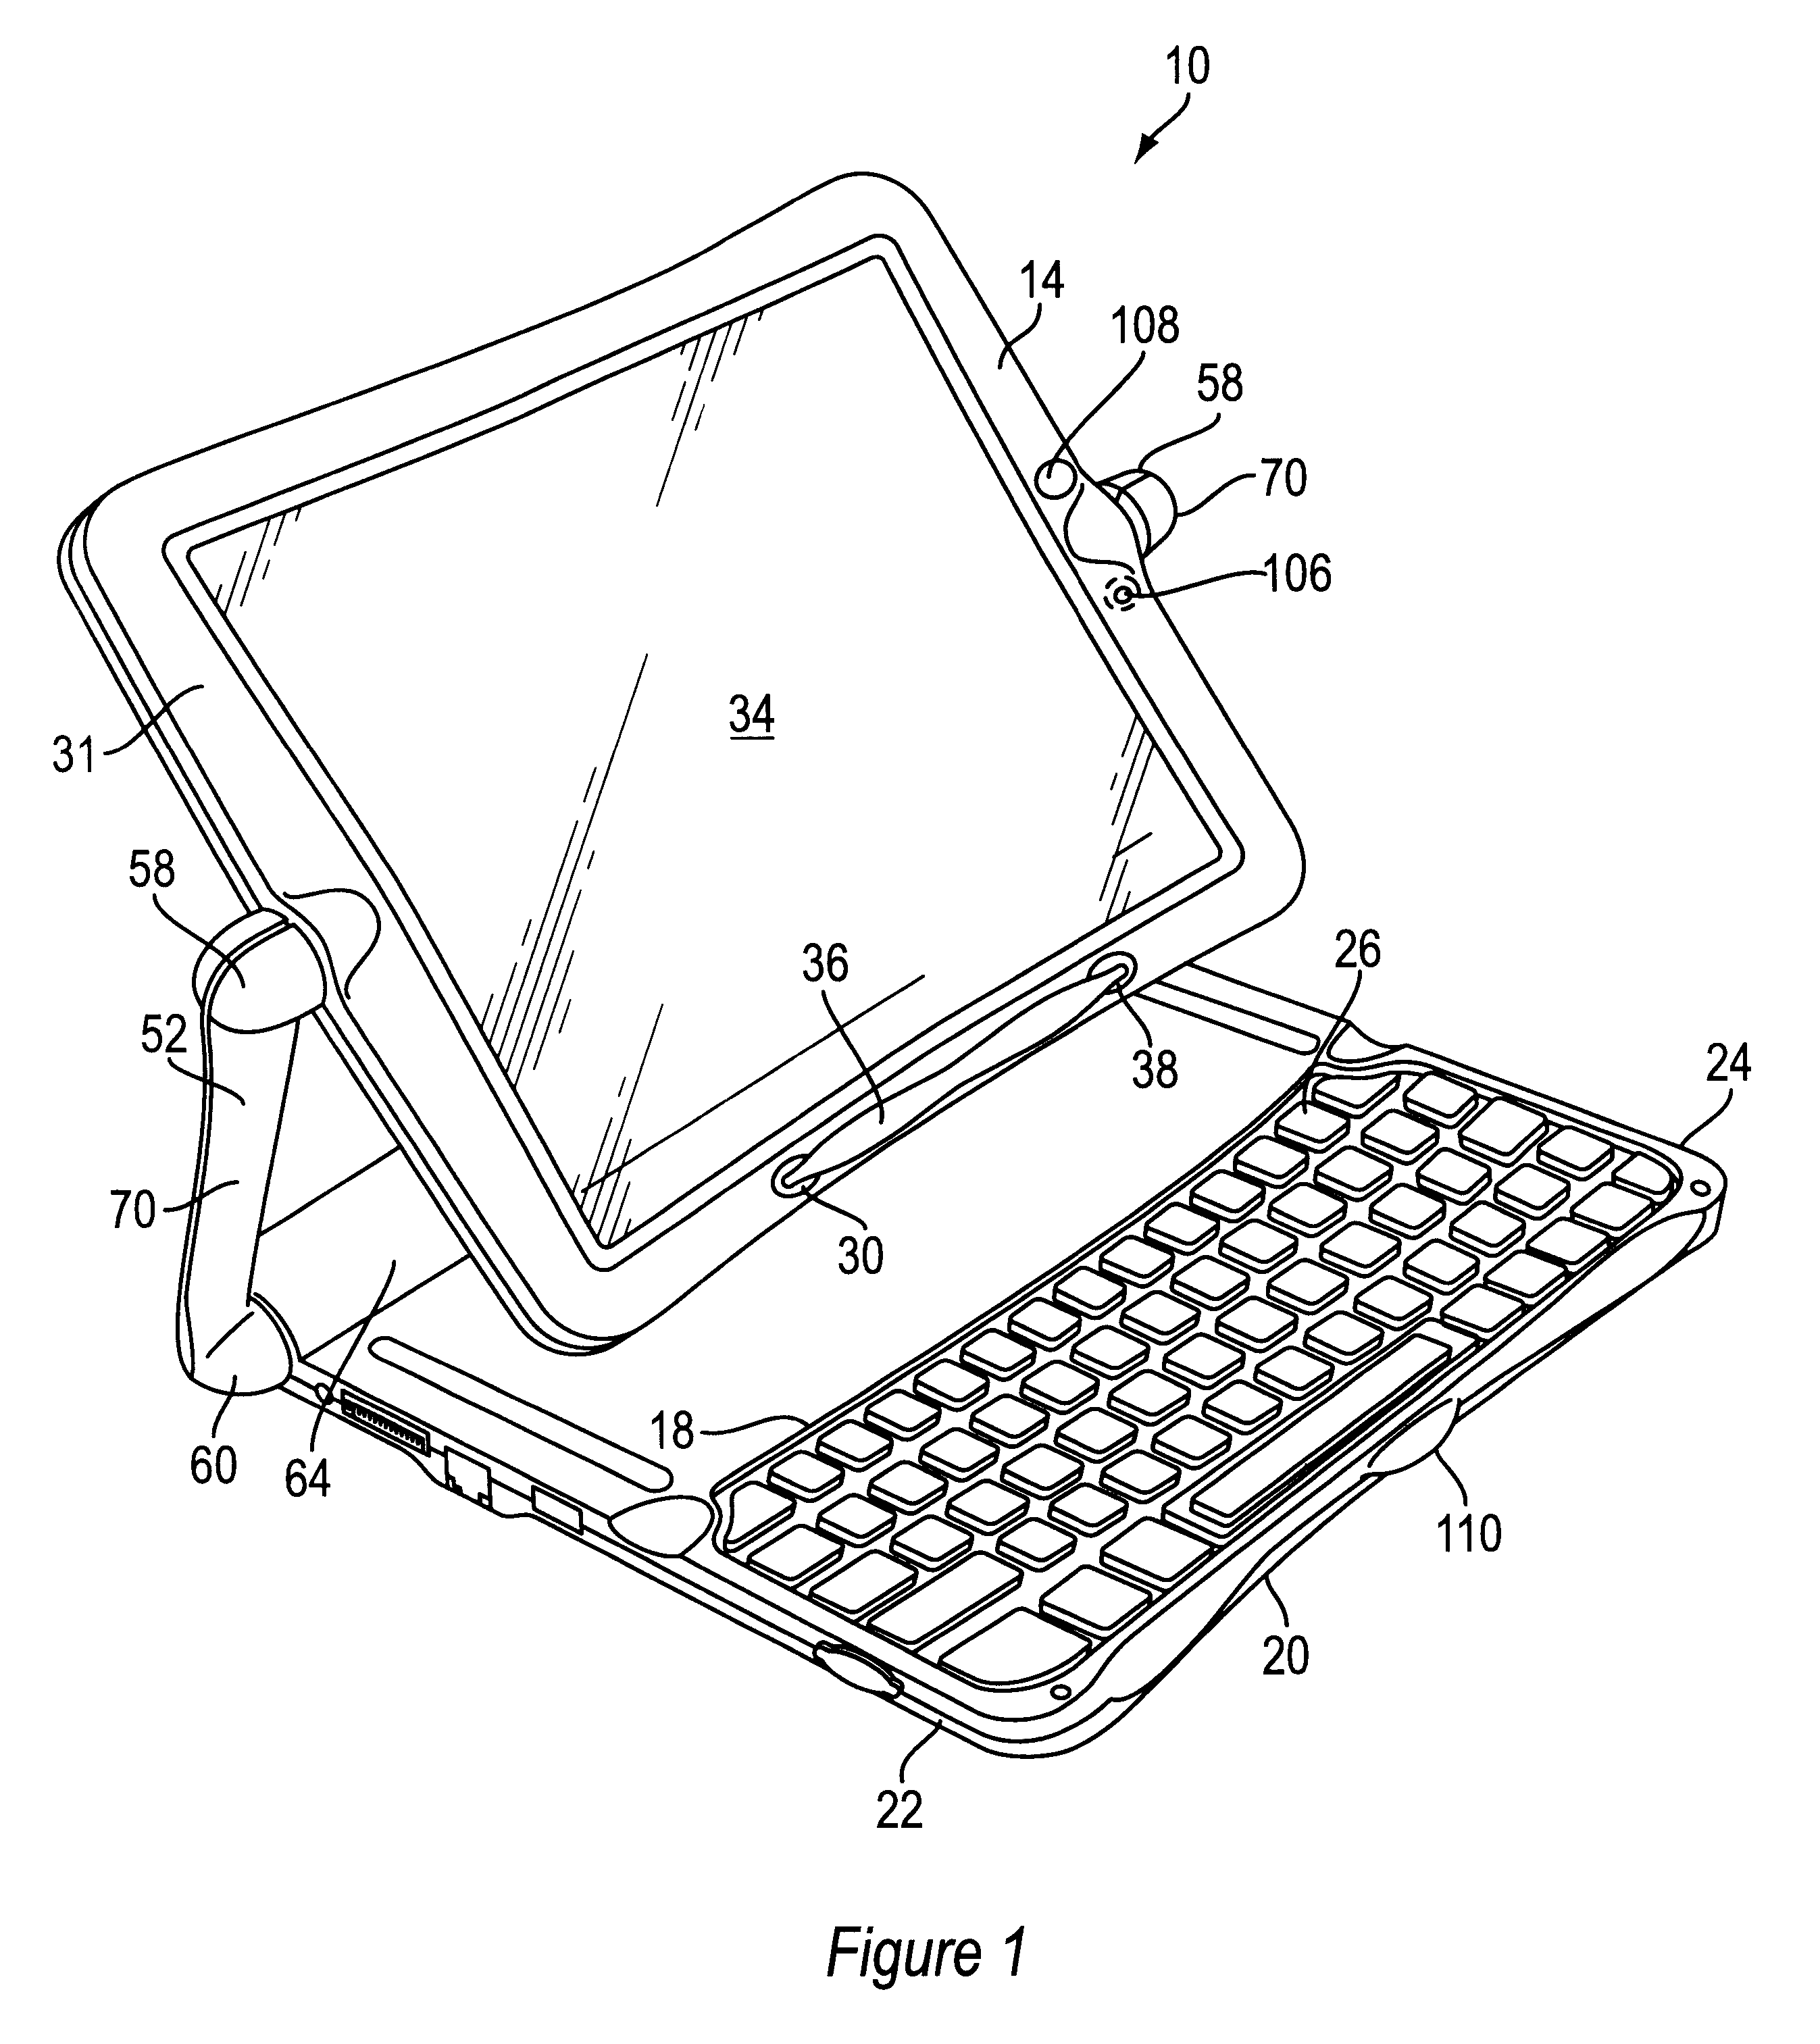 Apparatus and method for connecting and articulating display in a portable computer having multiple display orientations